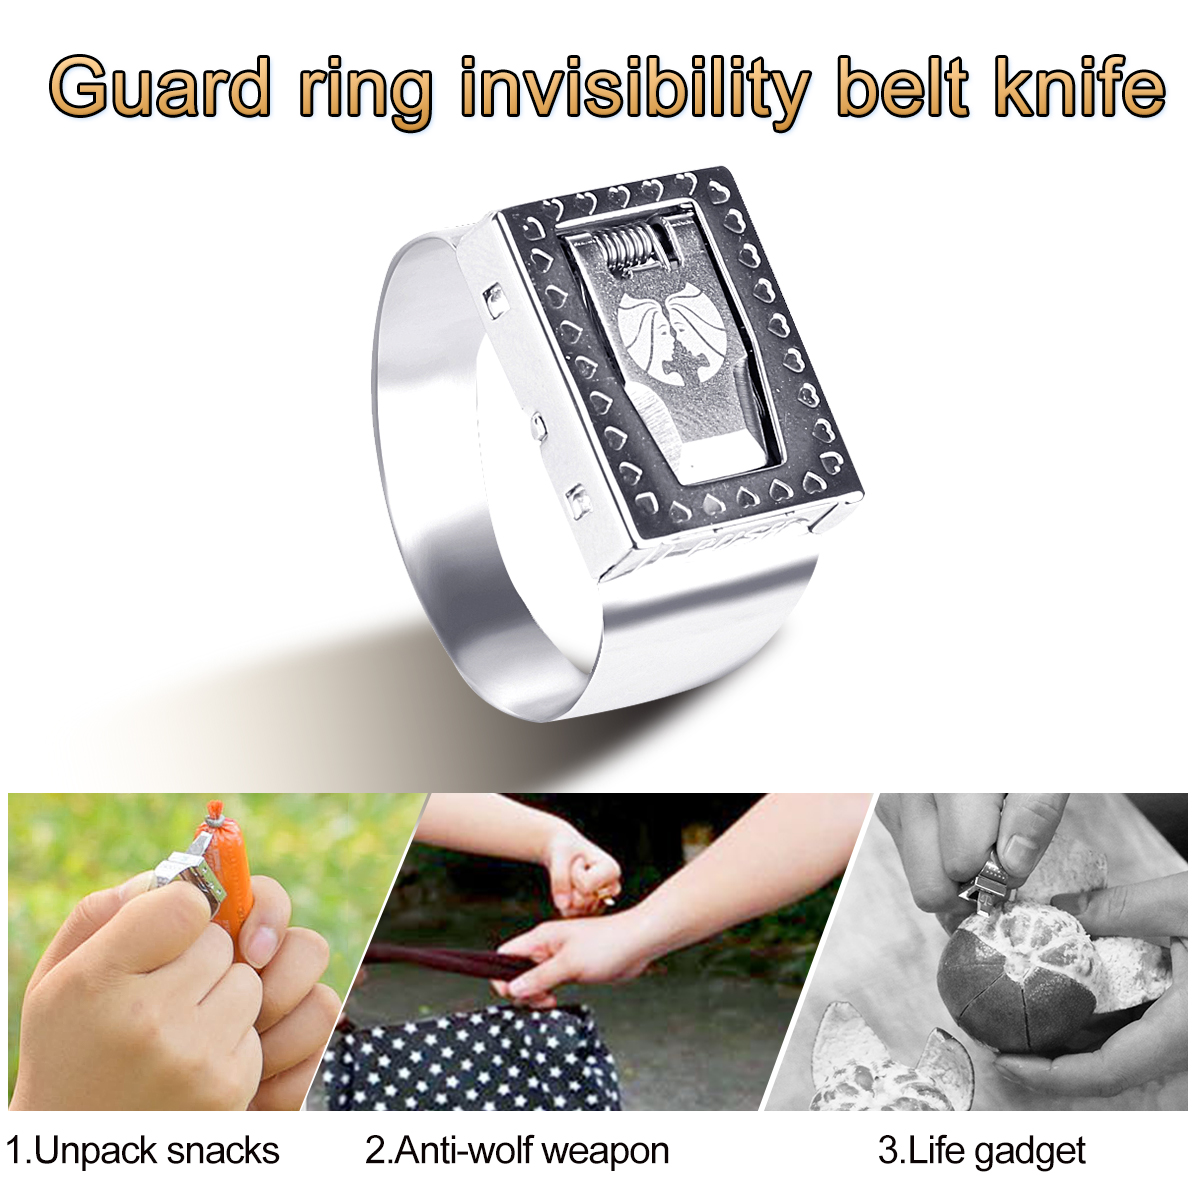 12-Constellation-Self-Protection-Ring-Body-Guard-Ring-Invisibility-Hidden-Ring-Blade-Emergency-Rescu-1423398-3